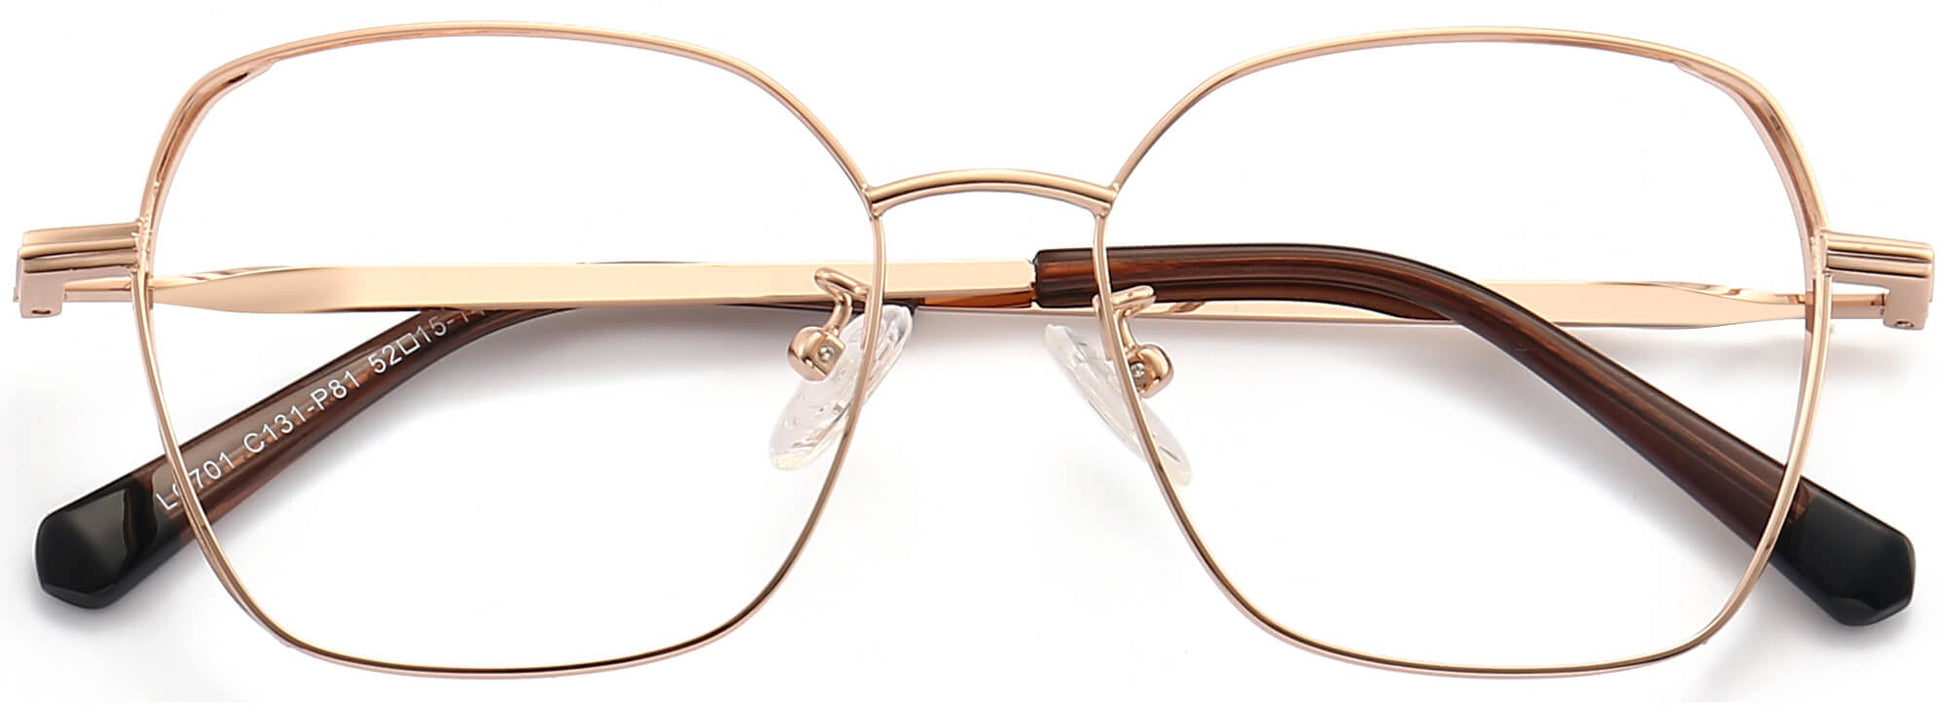 Maliyah Square Gold Eyeglasses from ANRRI, closed view